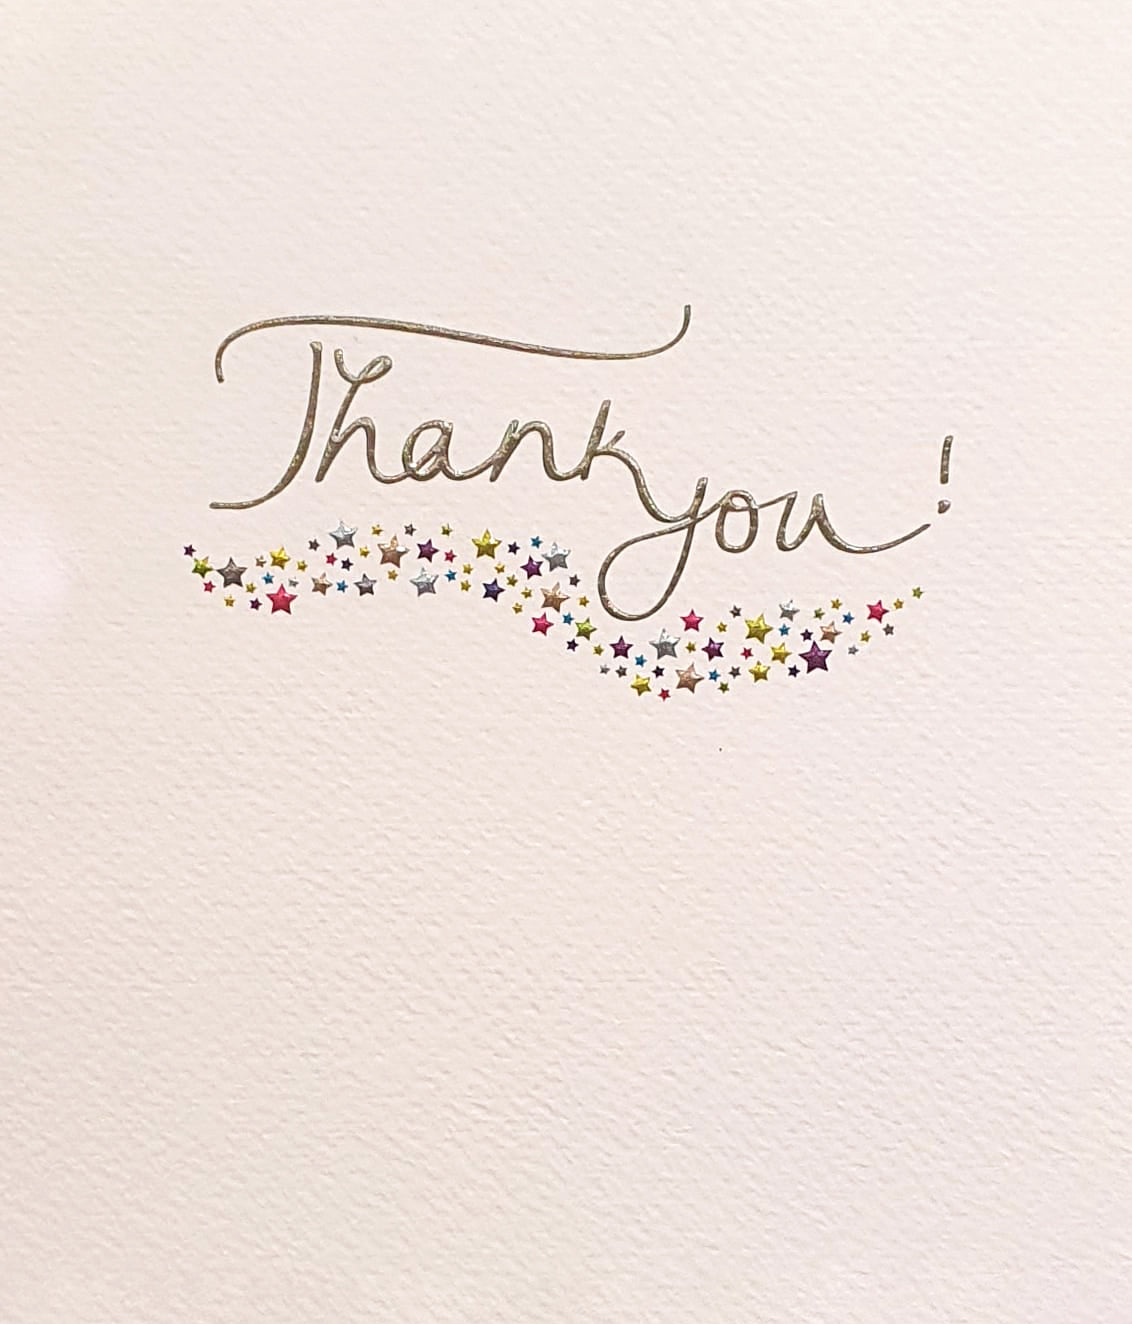 Thank You Card - The Colourful Stars Of Gratitude